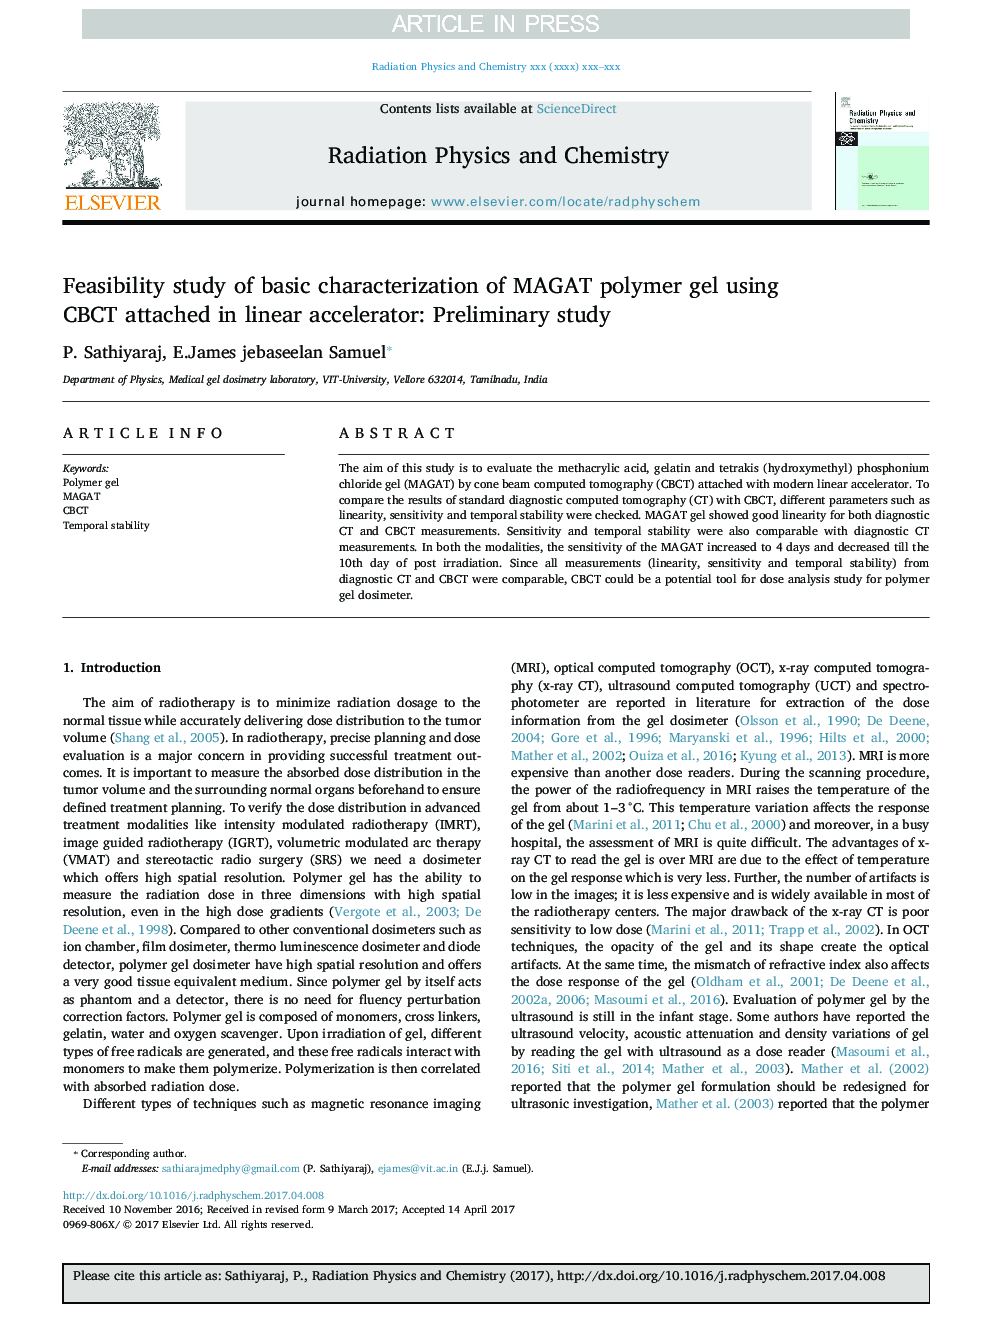 Feasibility study of basic characterization of MAGAT polymer gel using CBCT attached in linear accelerator: Preliminary study